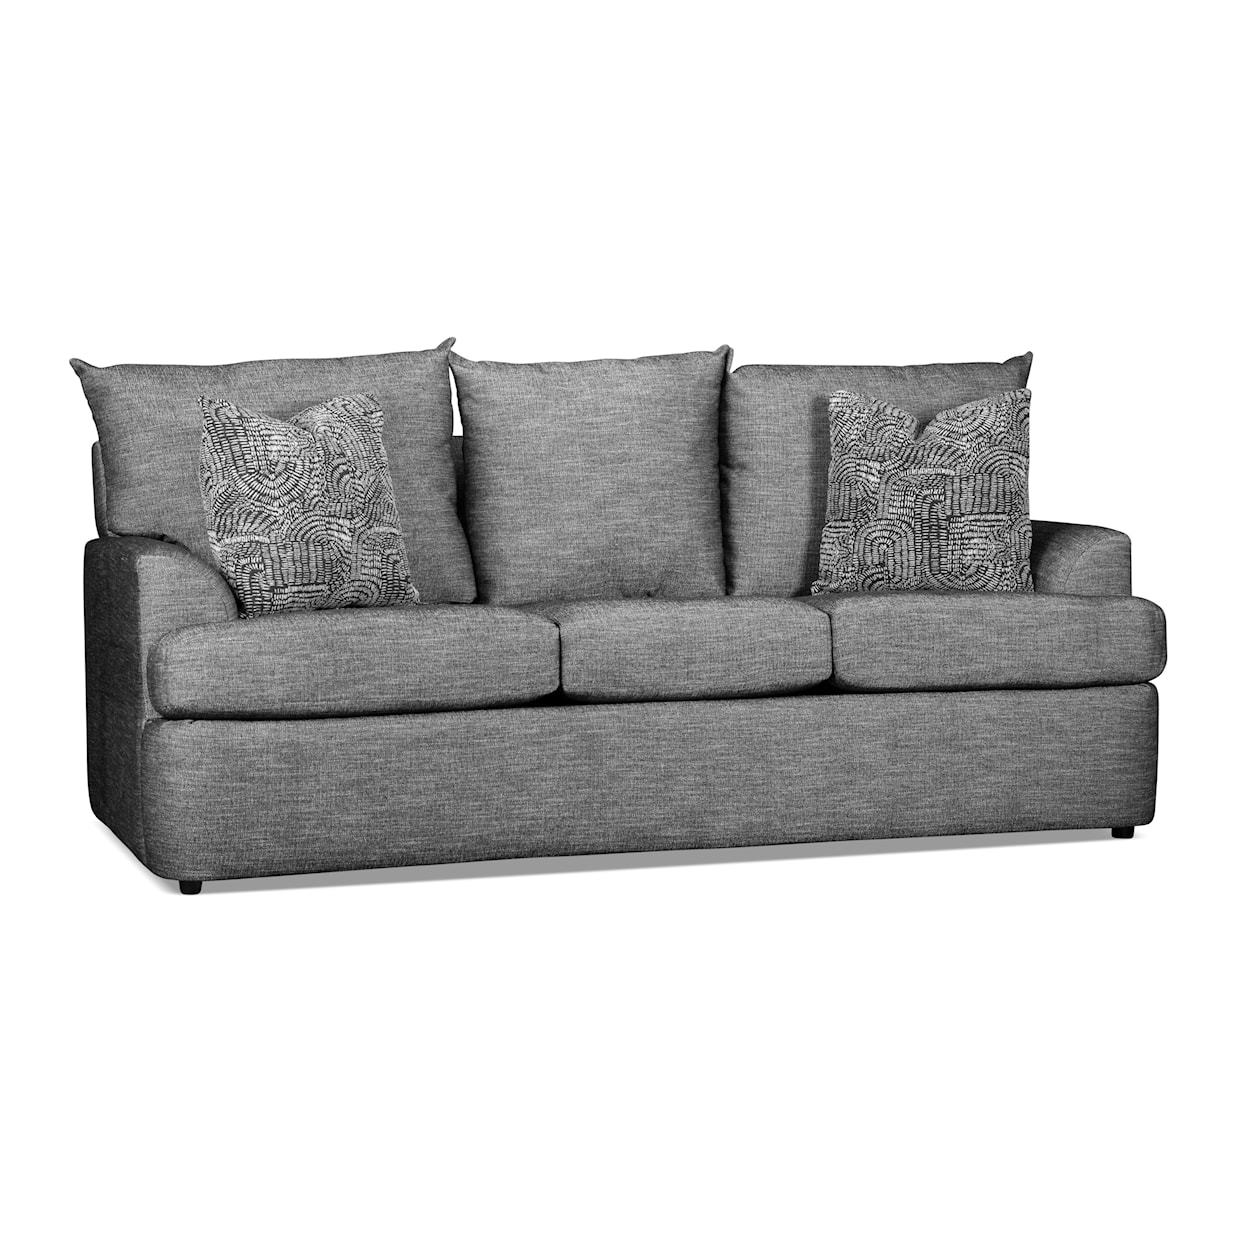 Style Collection by Morris Home Catherine Catherine Sofa